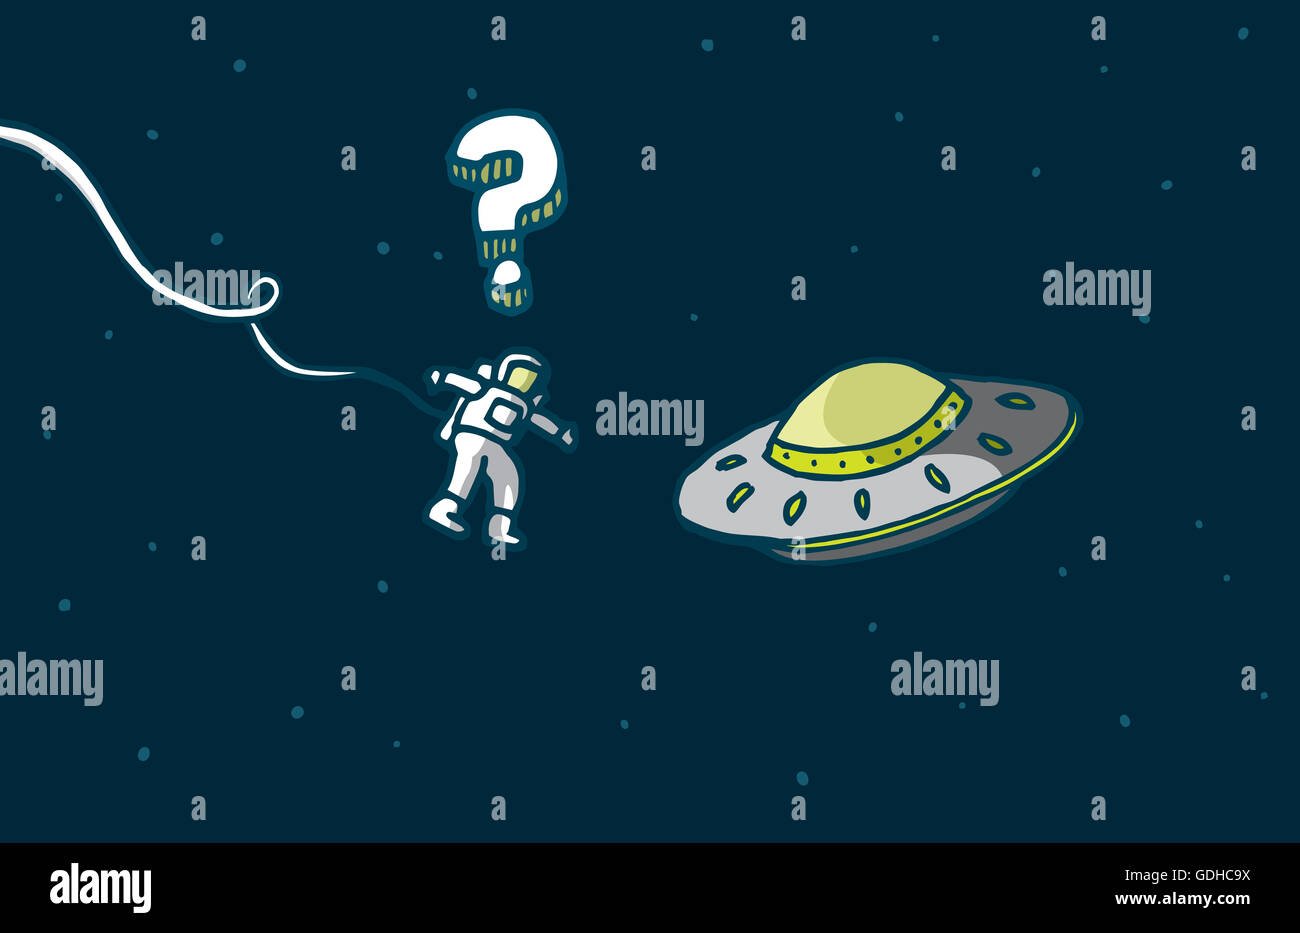 Cartoon illustration of a funny encounter between astronaut and alien spaceship Stock Photo